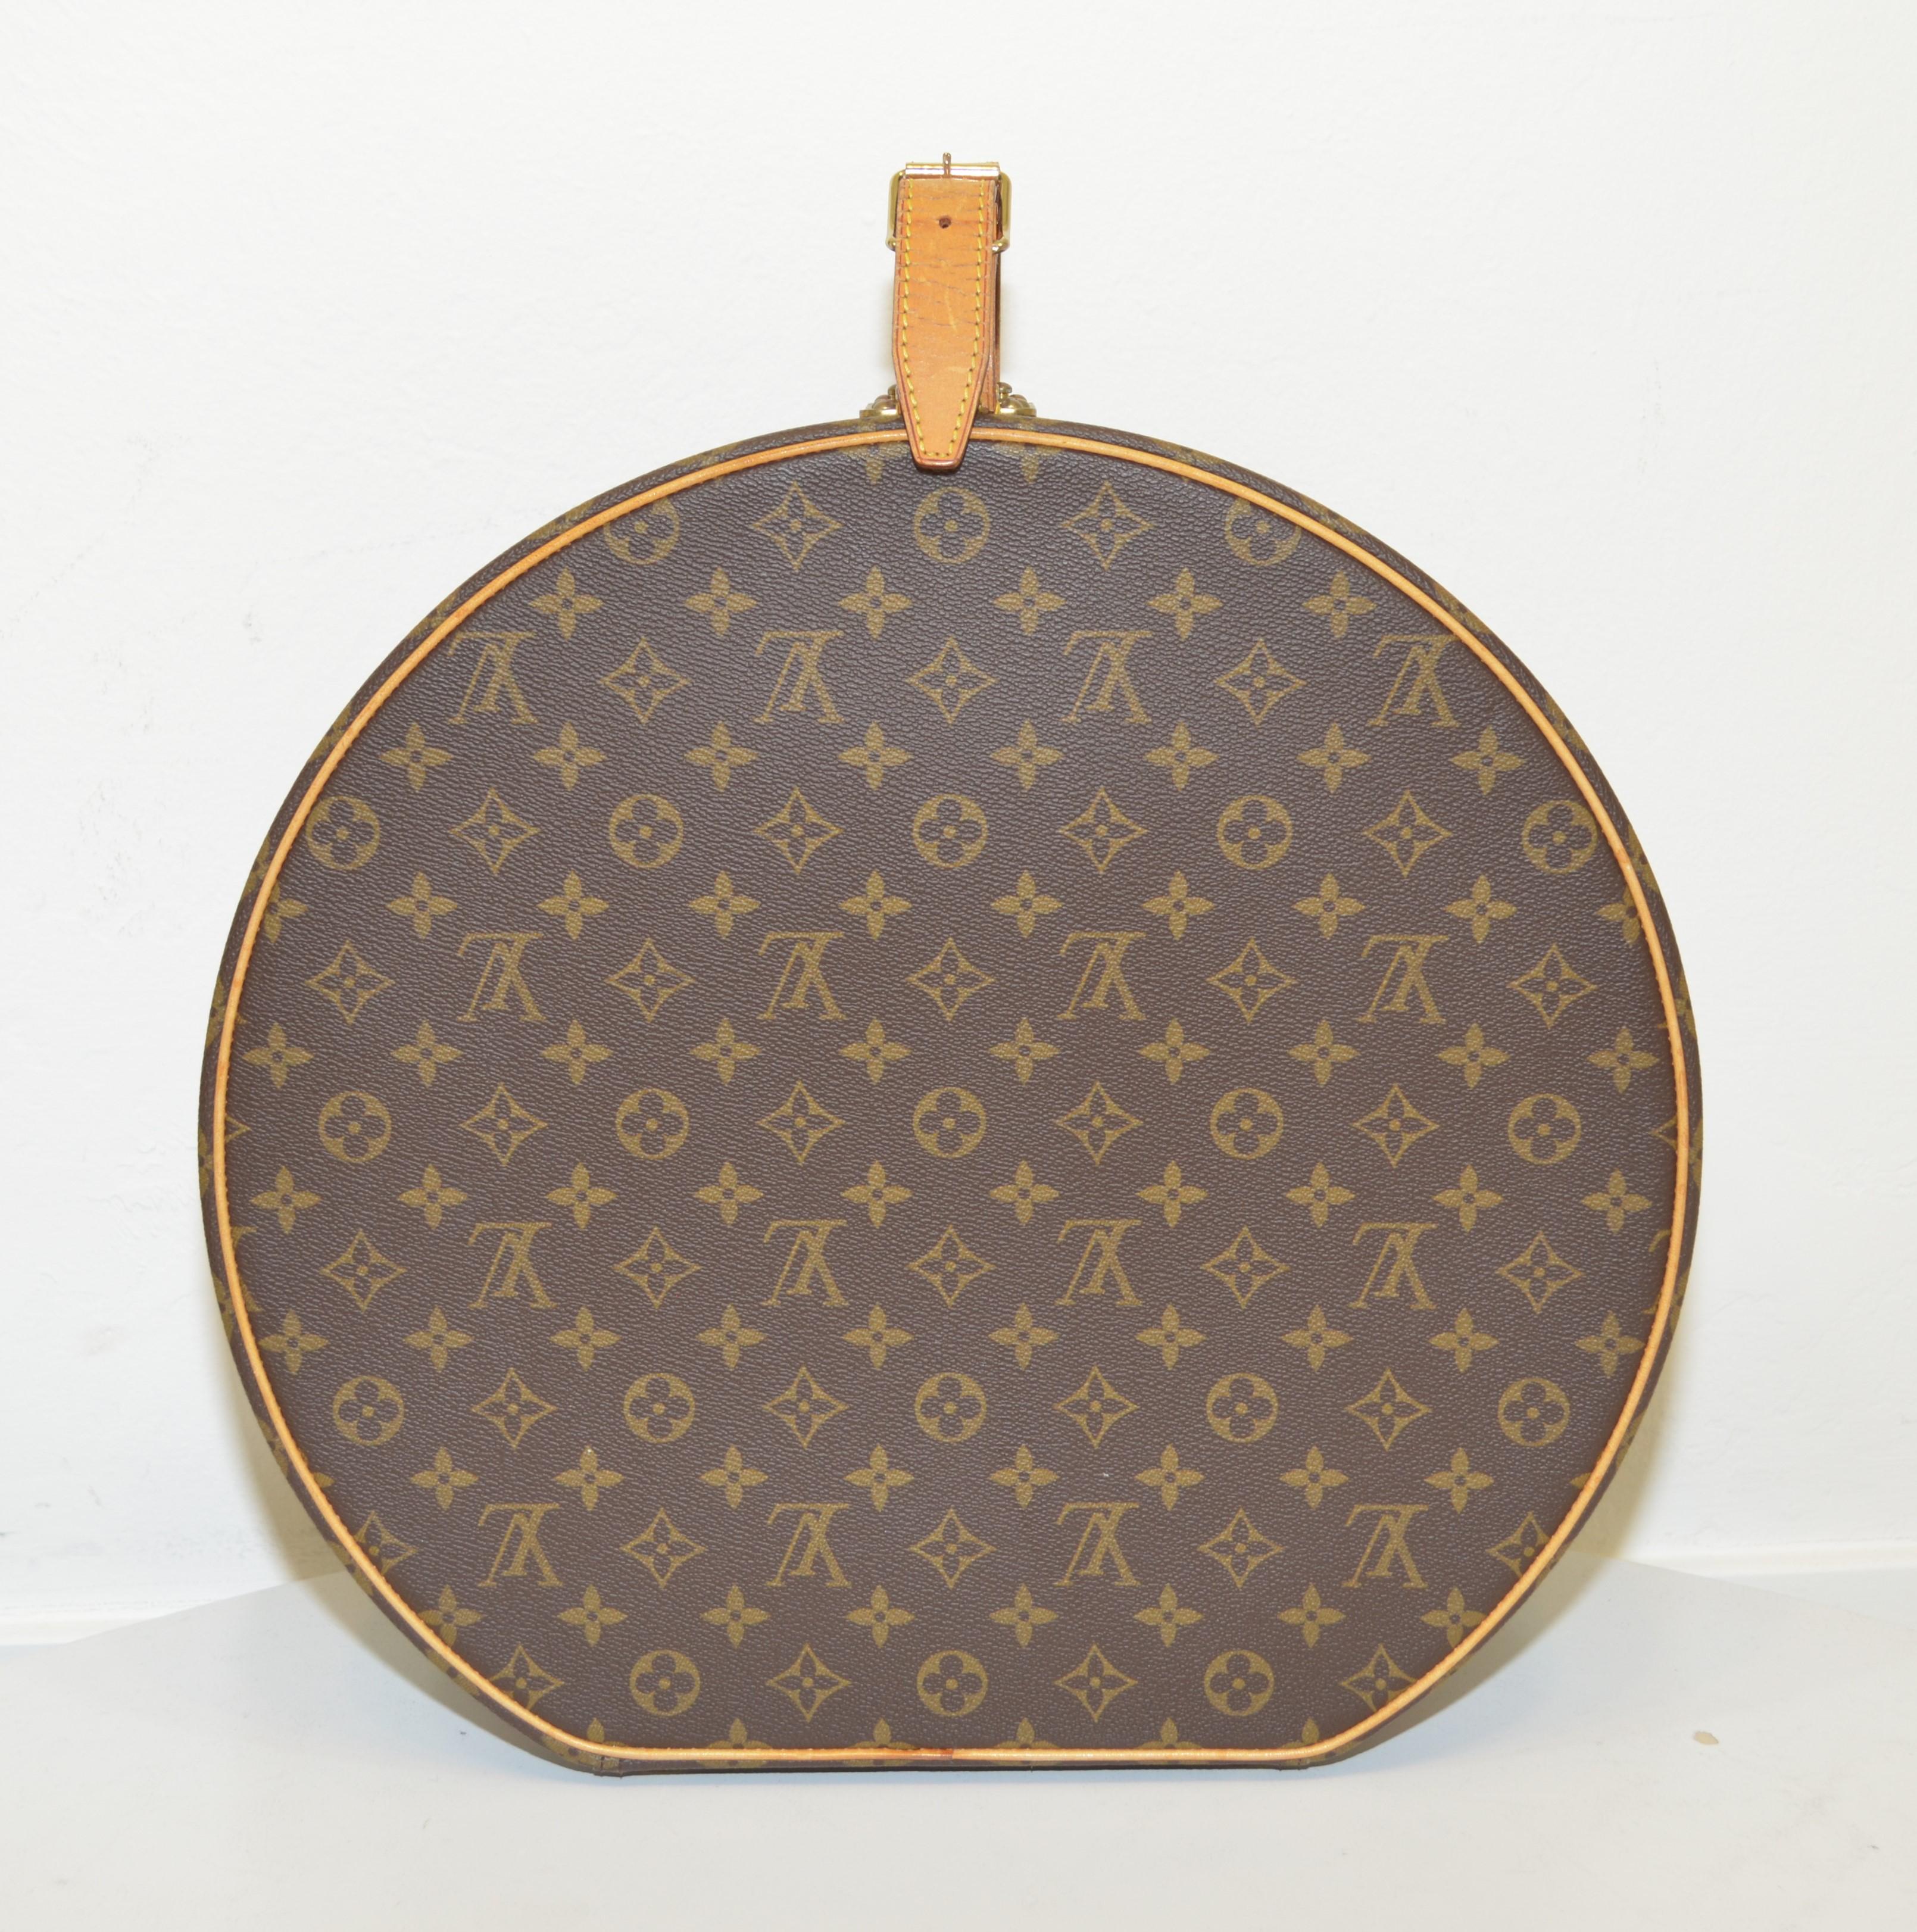 Louis Vuitton hatbox is featured in the signature monogram print with tan leather trimmings and top handle with an adjustable buckle fastening. Interior is fully lined in a canvas fabric with one slip pocket. Hatbox is in great condition with some